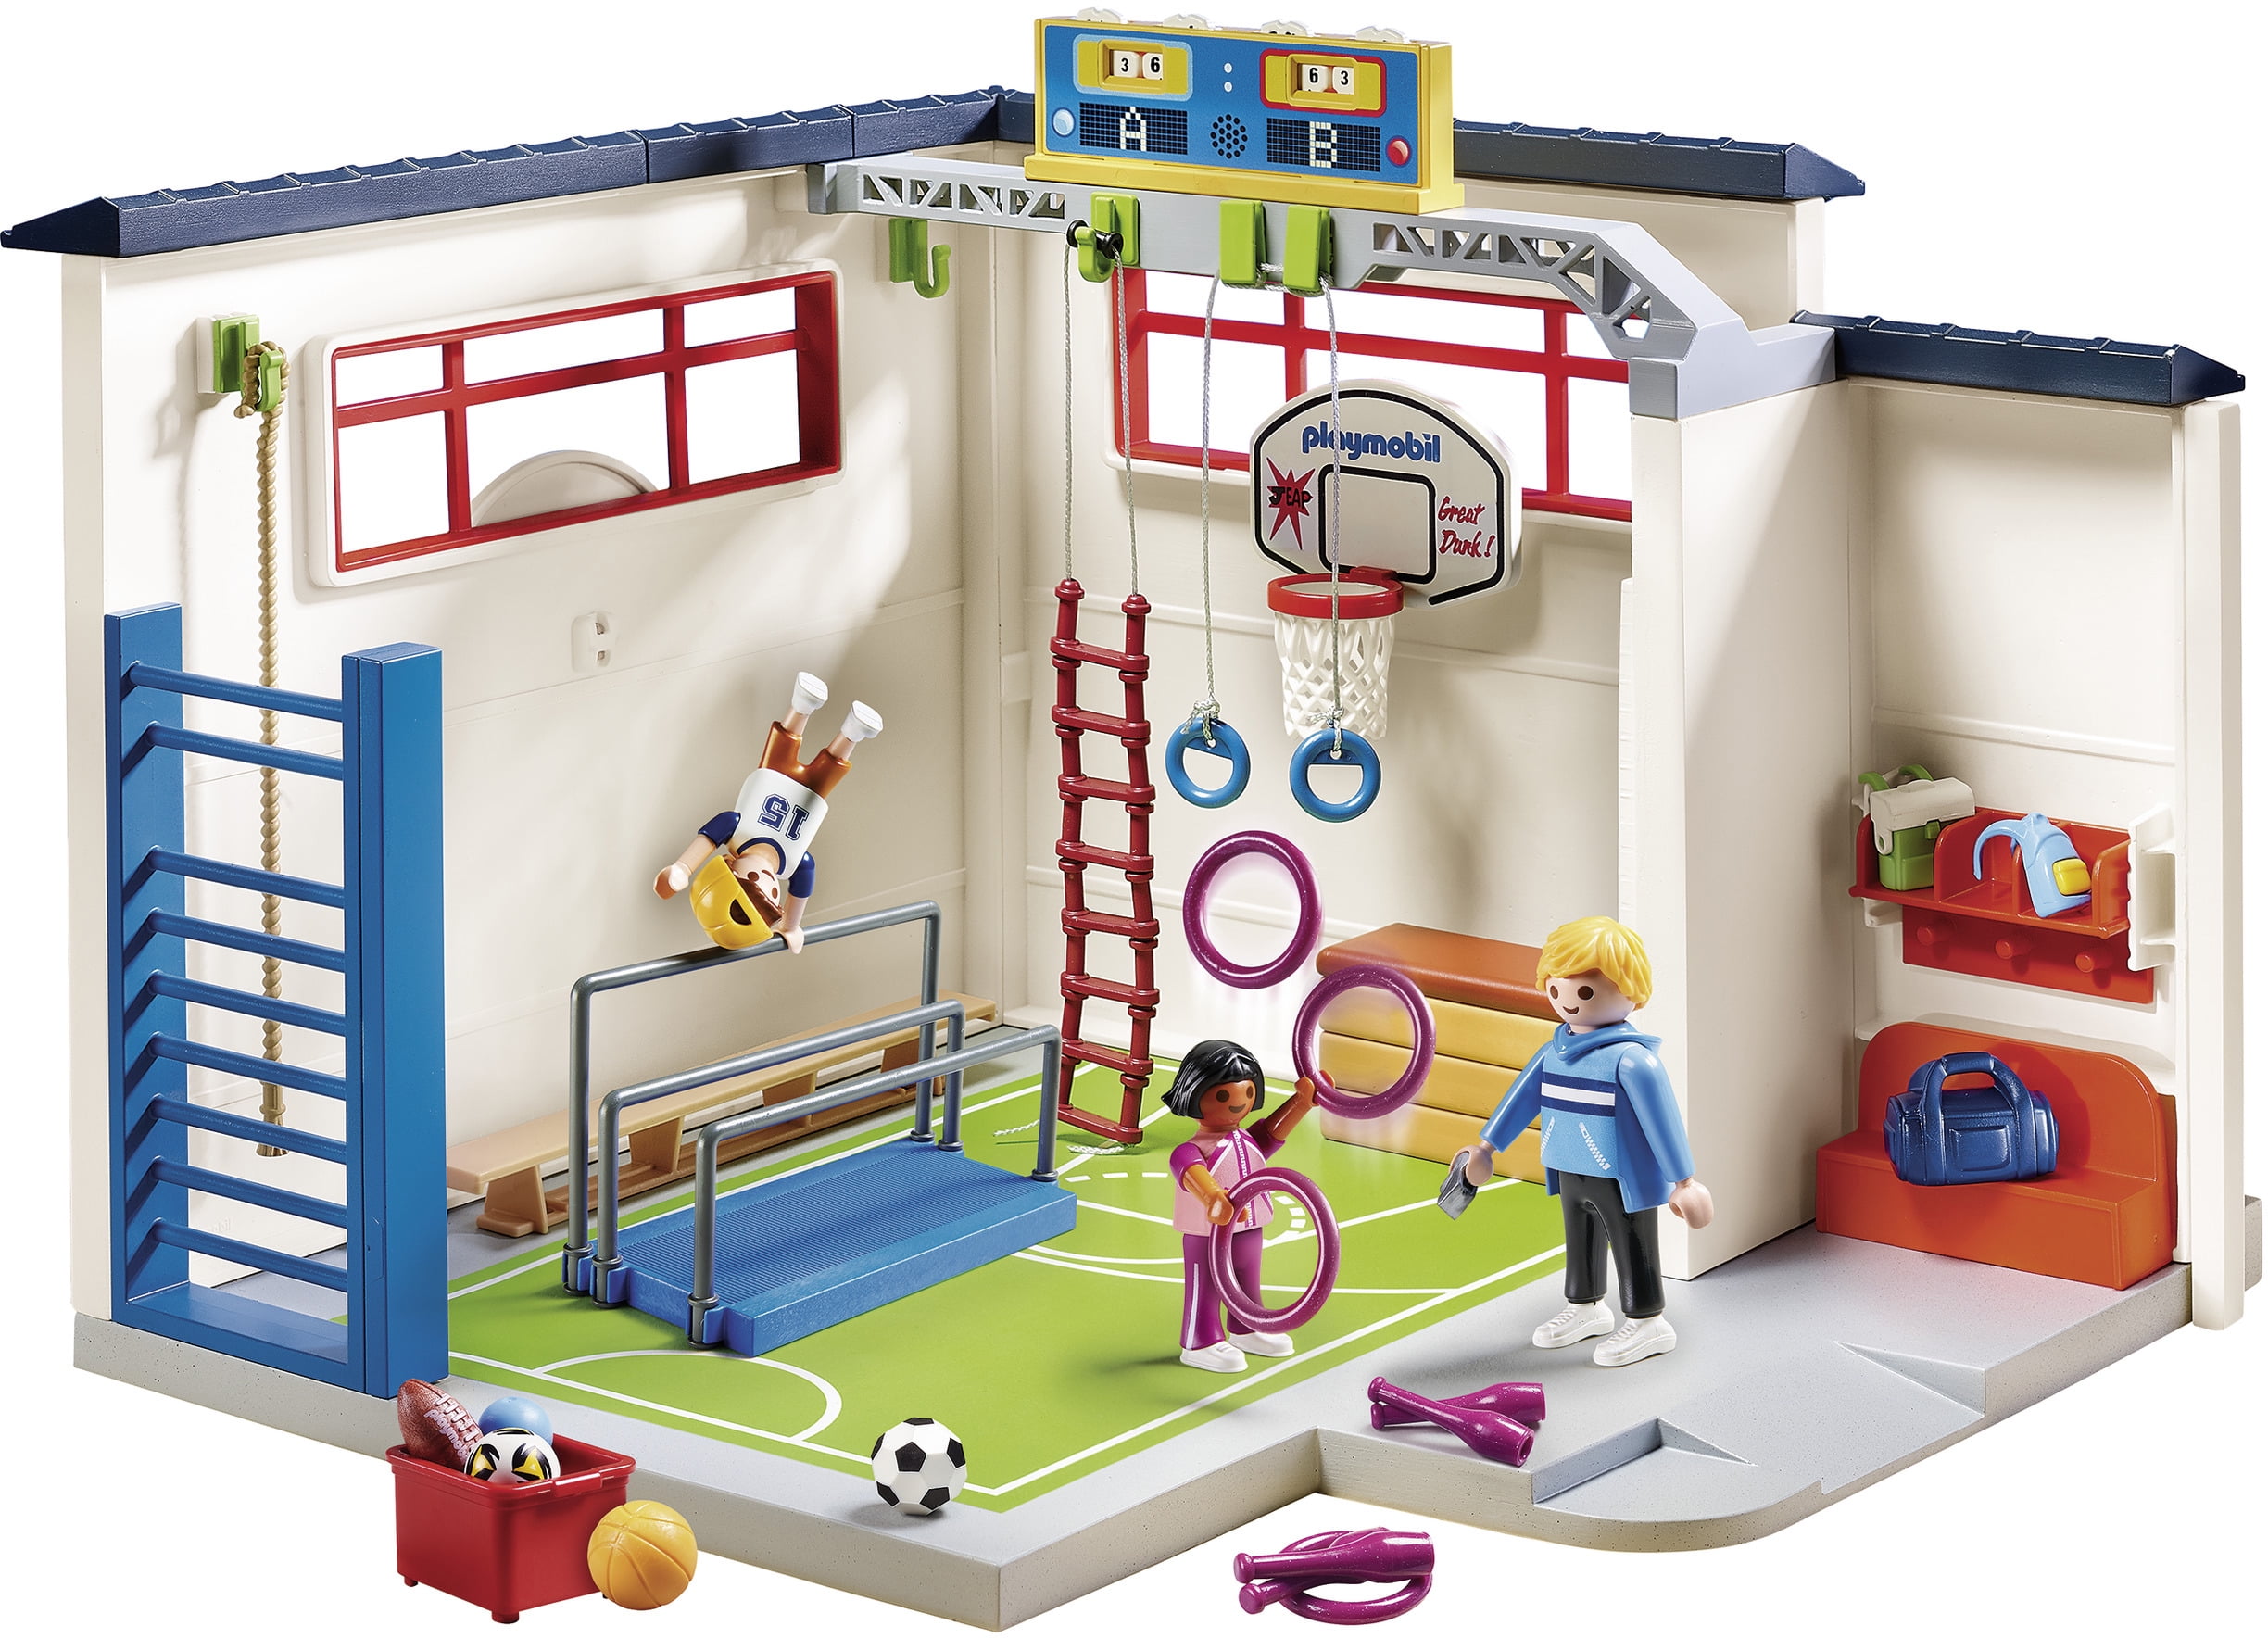 Playmobil Gym Building Set 9454 - New - Factory Sealed